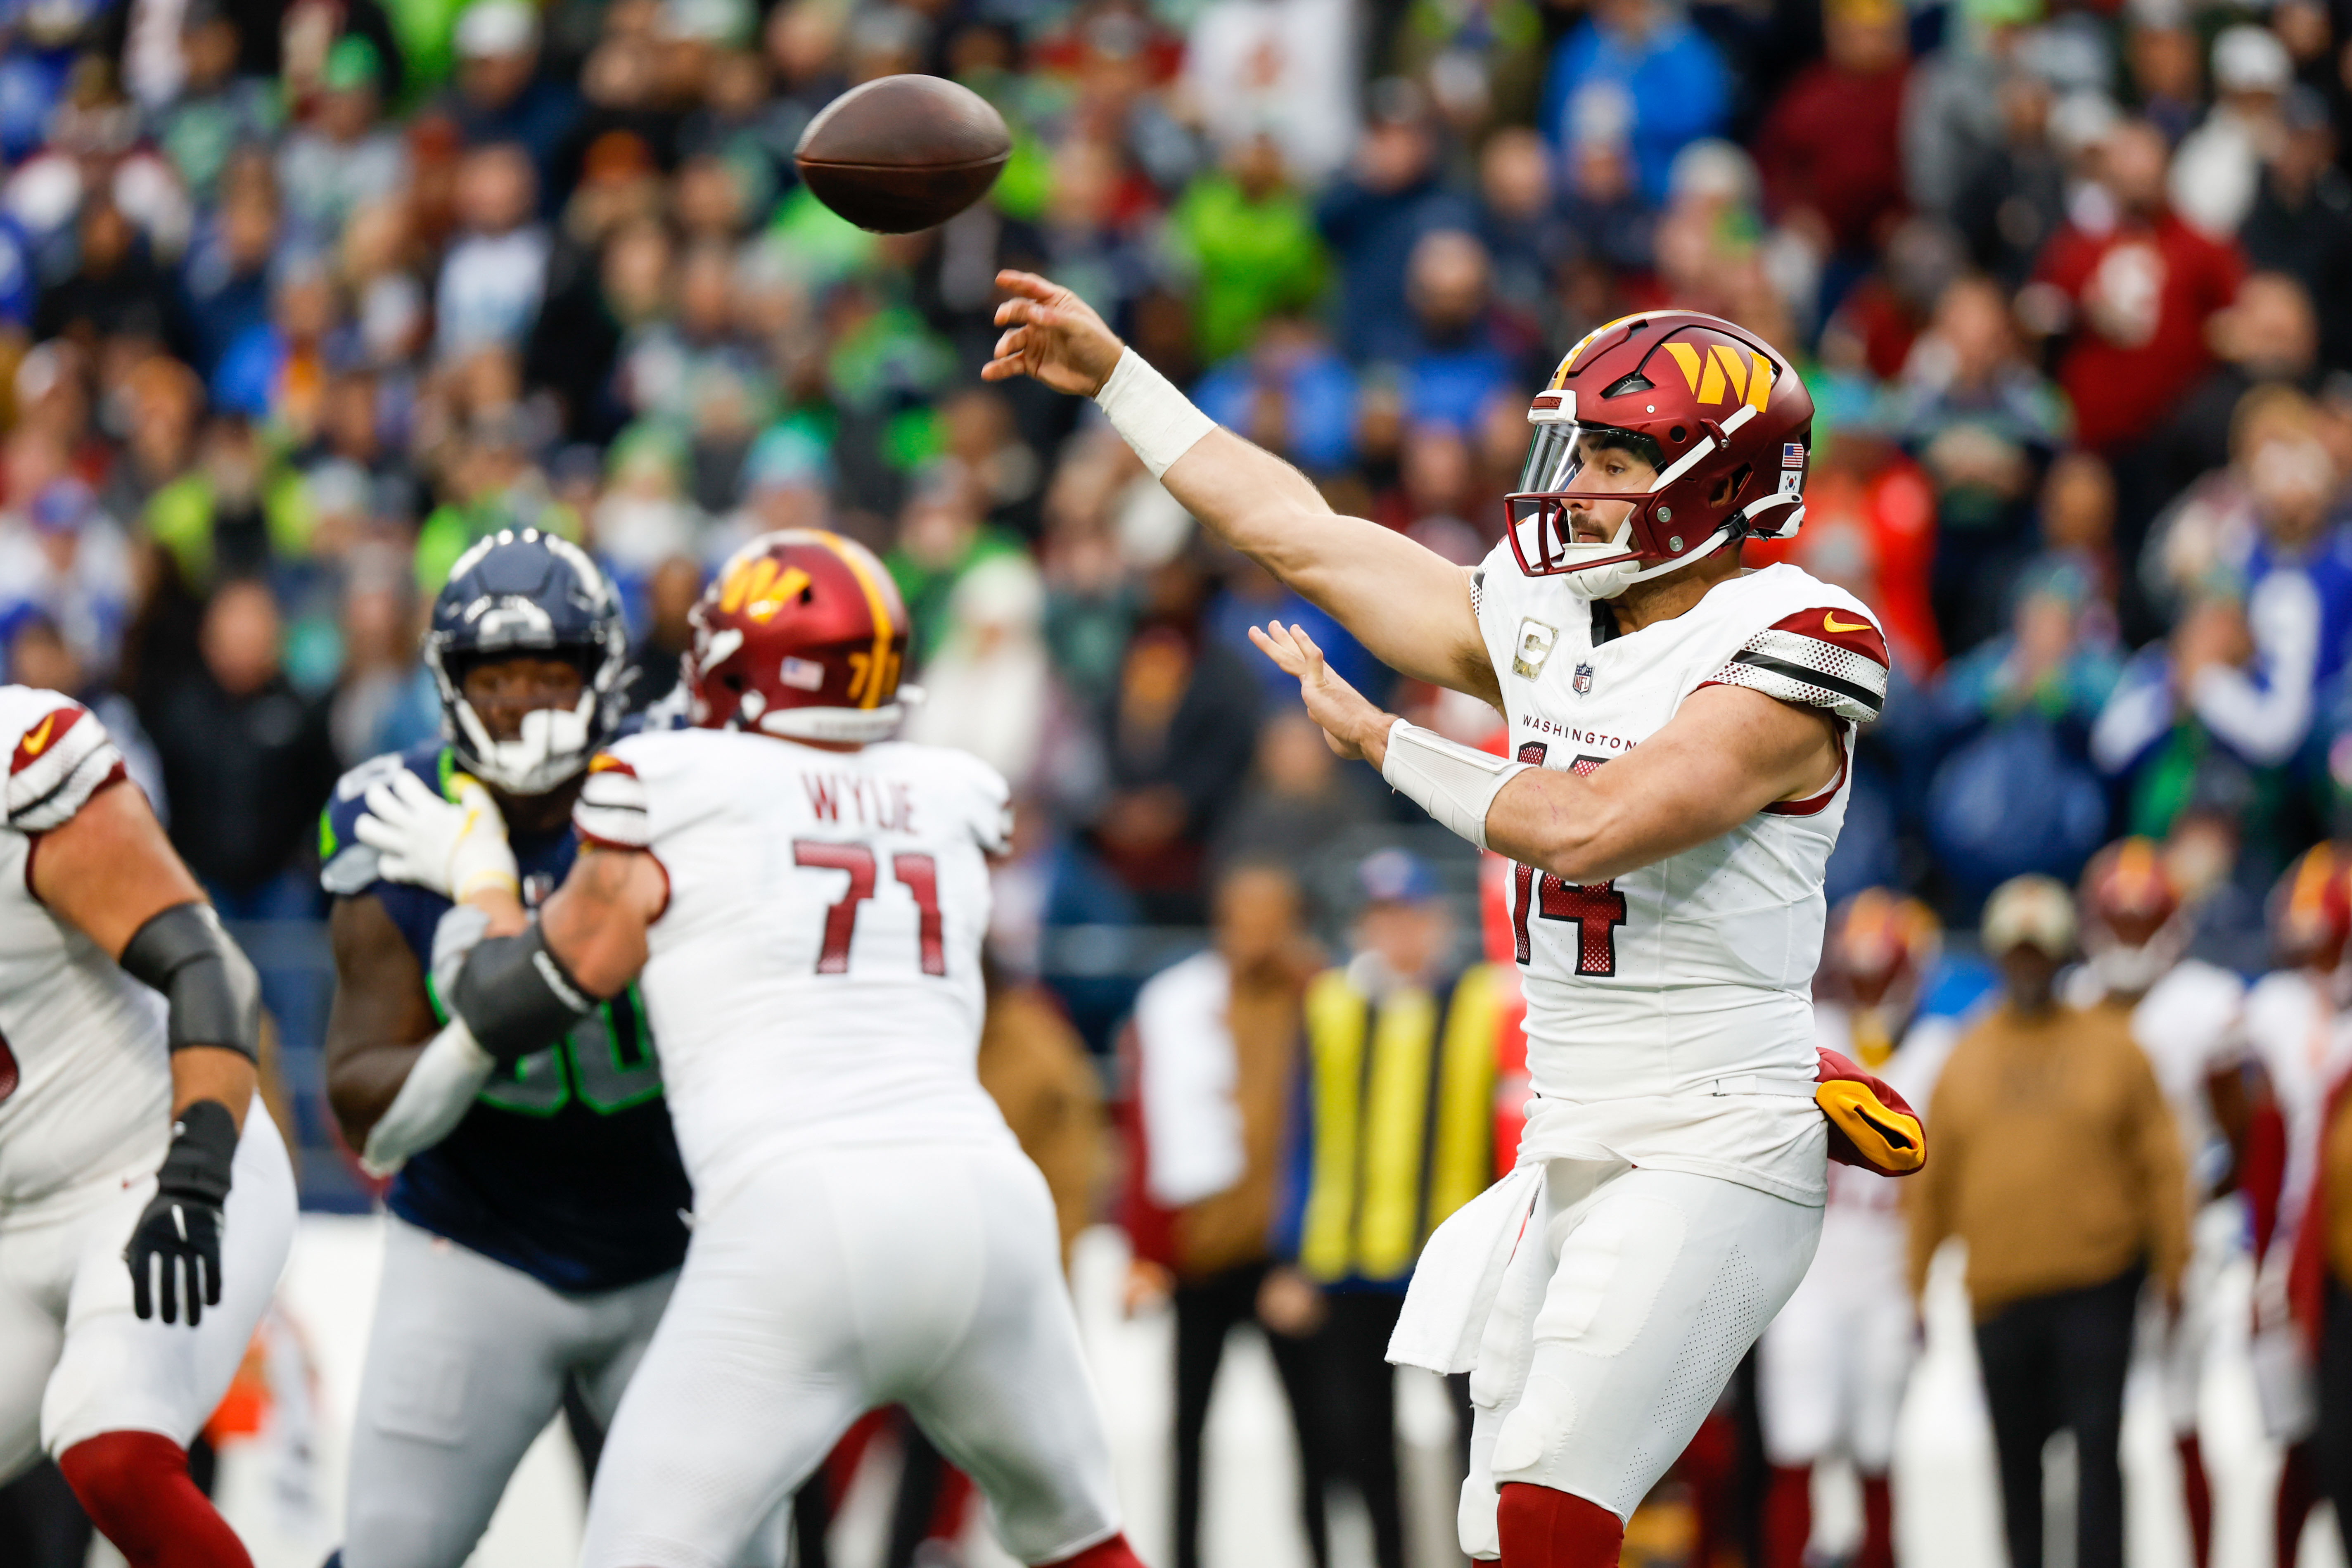 Though he led the NFL in interceptions, Sam Howell had plenty of positive moments in his first year as a starter in Washington, including throwing three touchdowns against Seattle on the road.